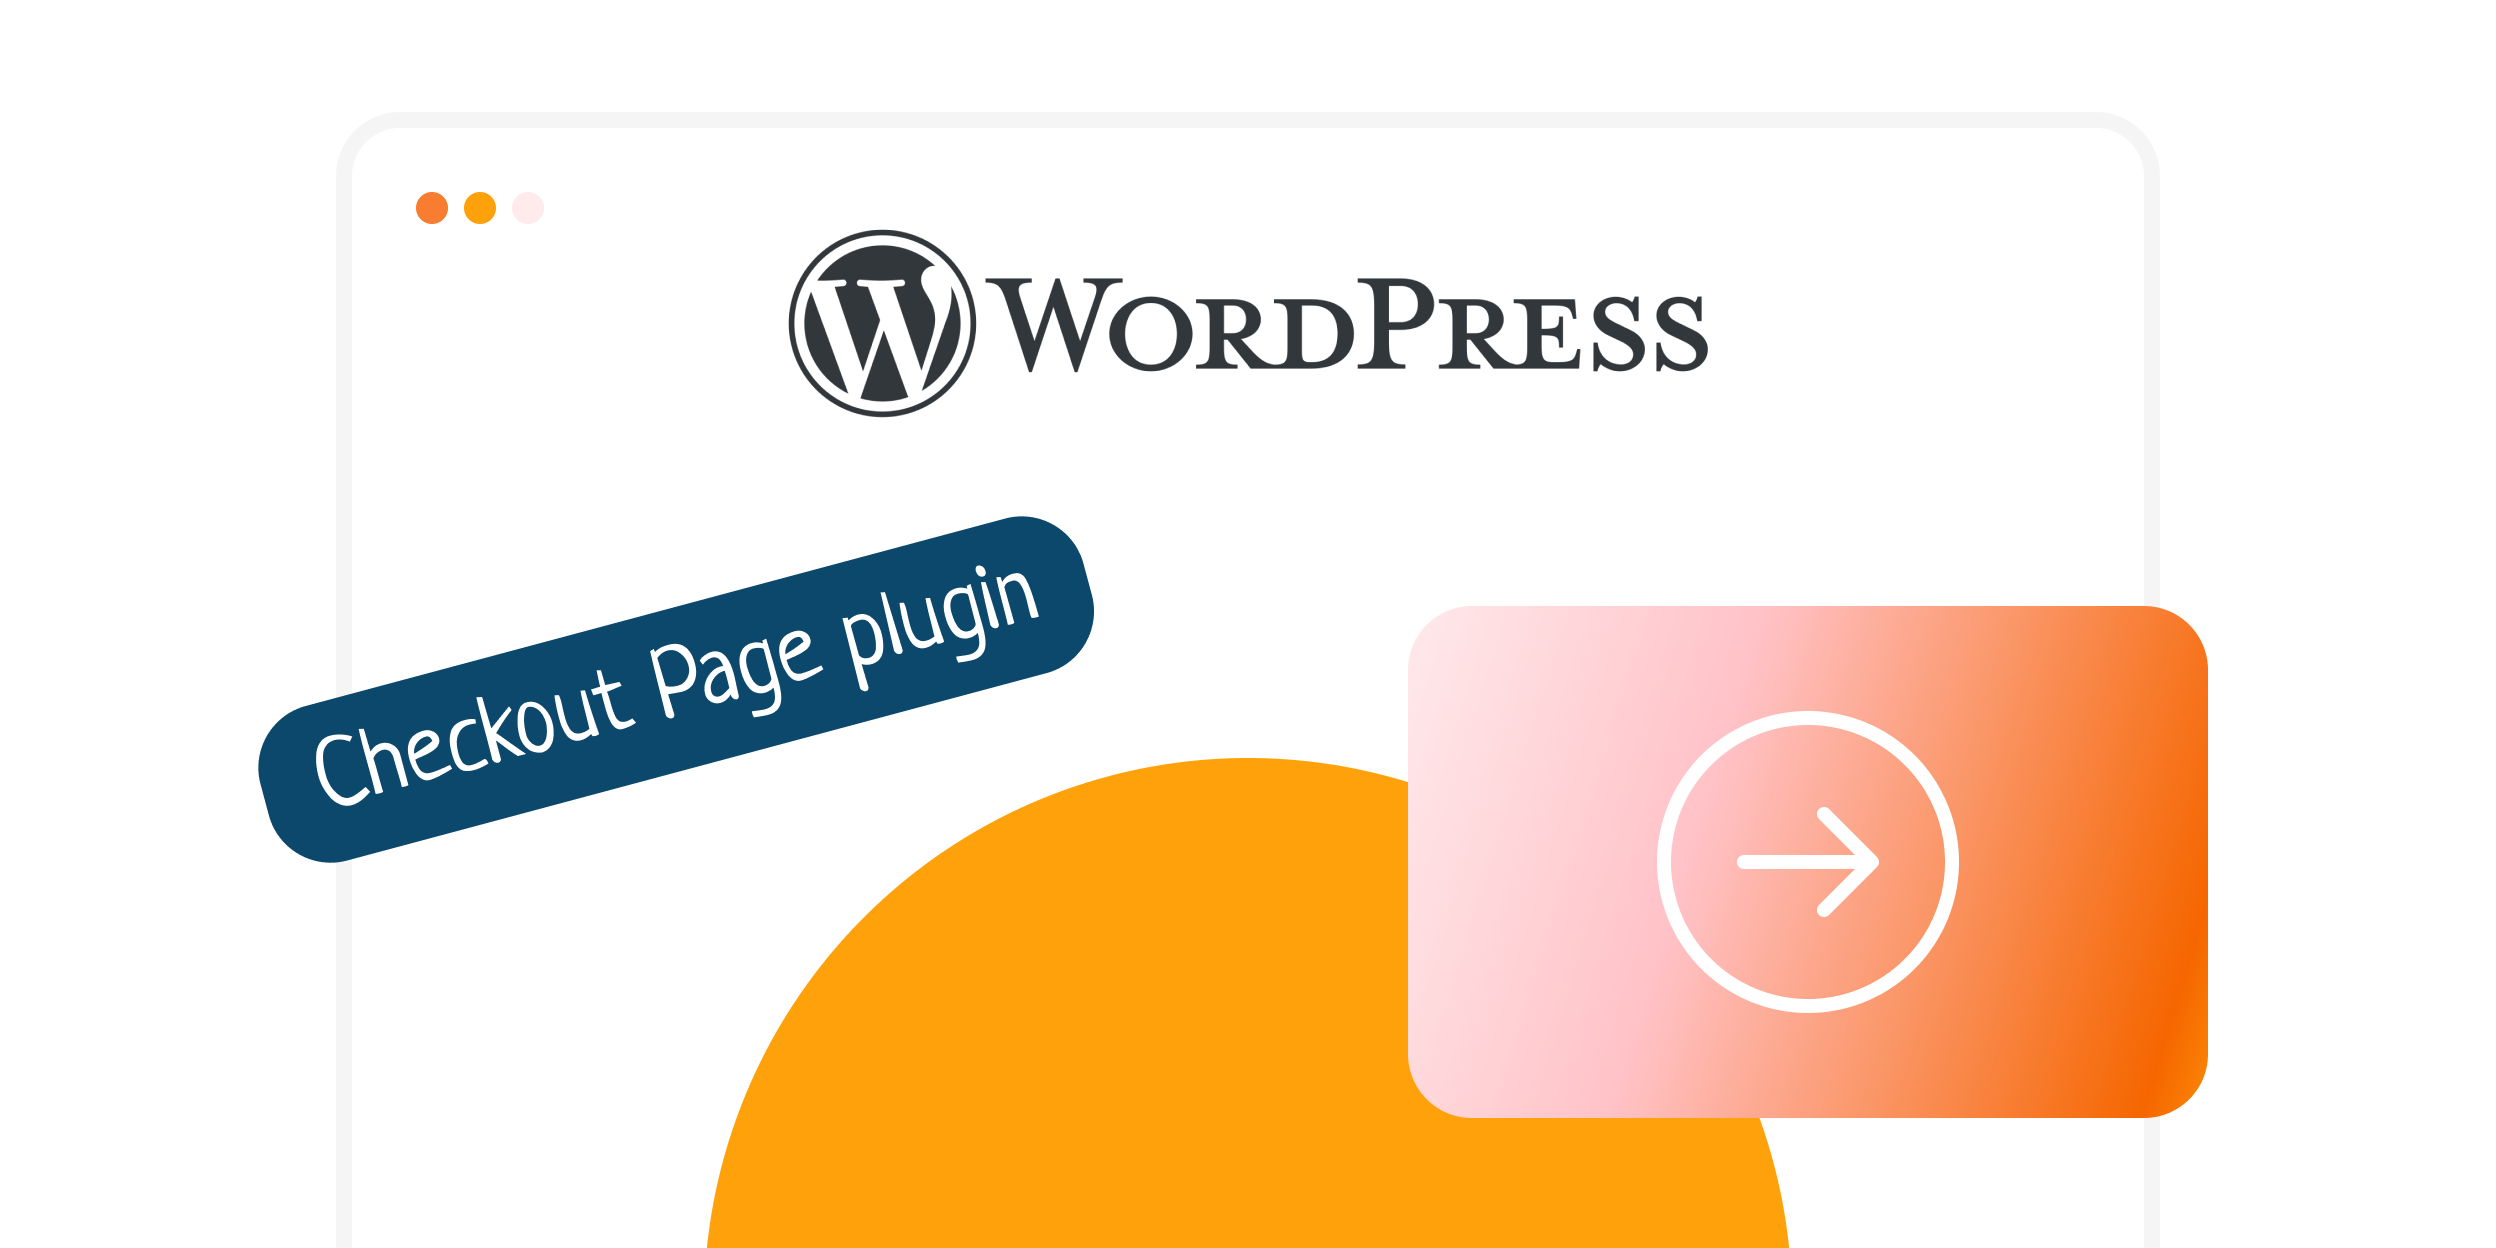 Introducing the Checkout Page plugin for WordPress!